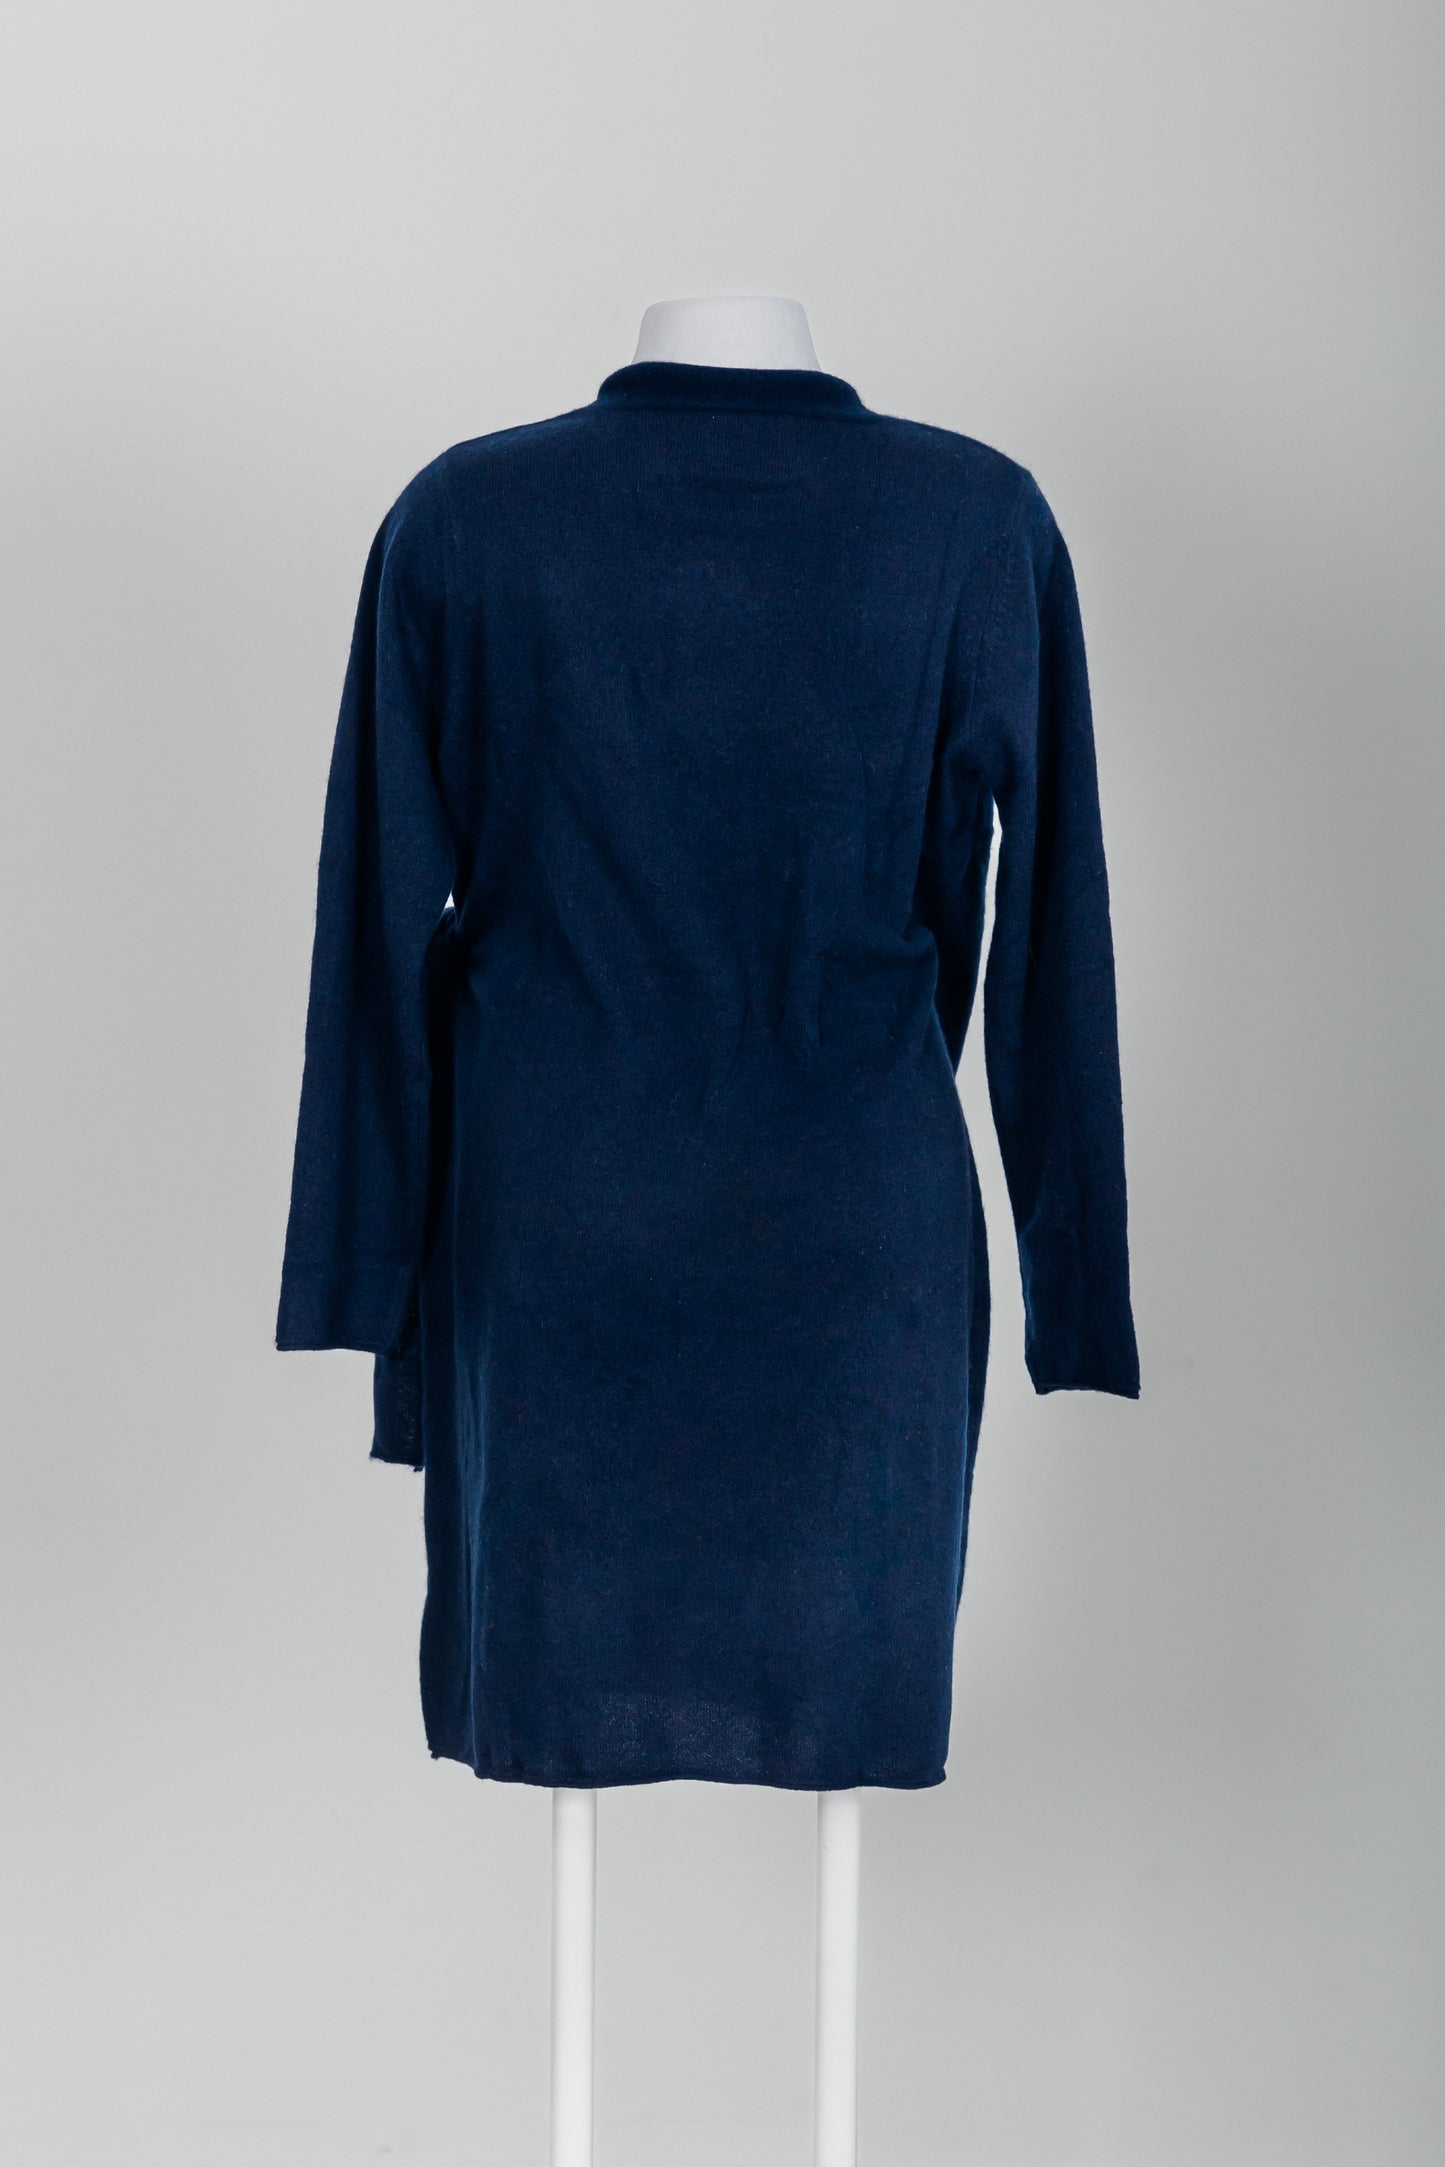 Cou Cou Maternity - Kokoon aus 100% Cashmere in Classic Navy